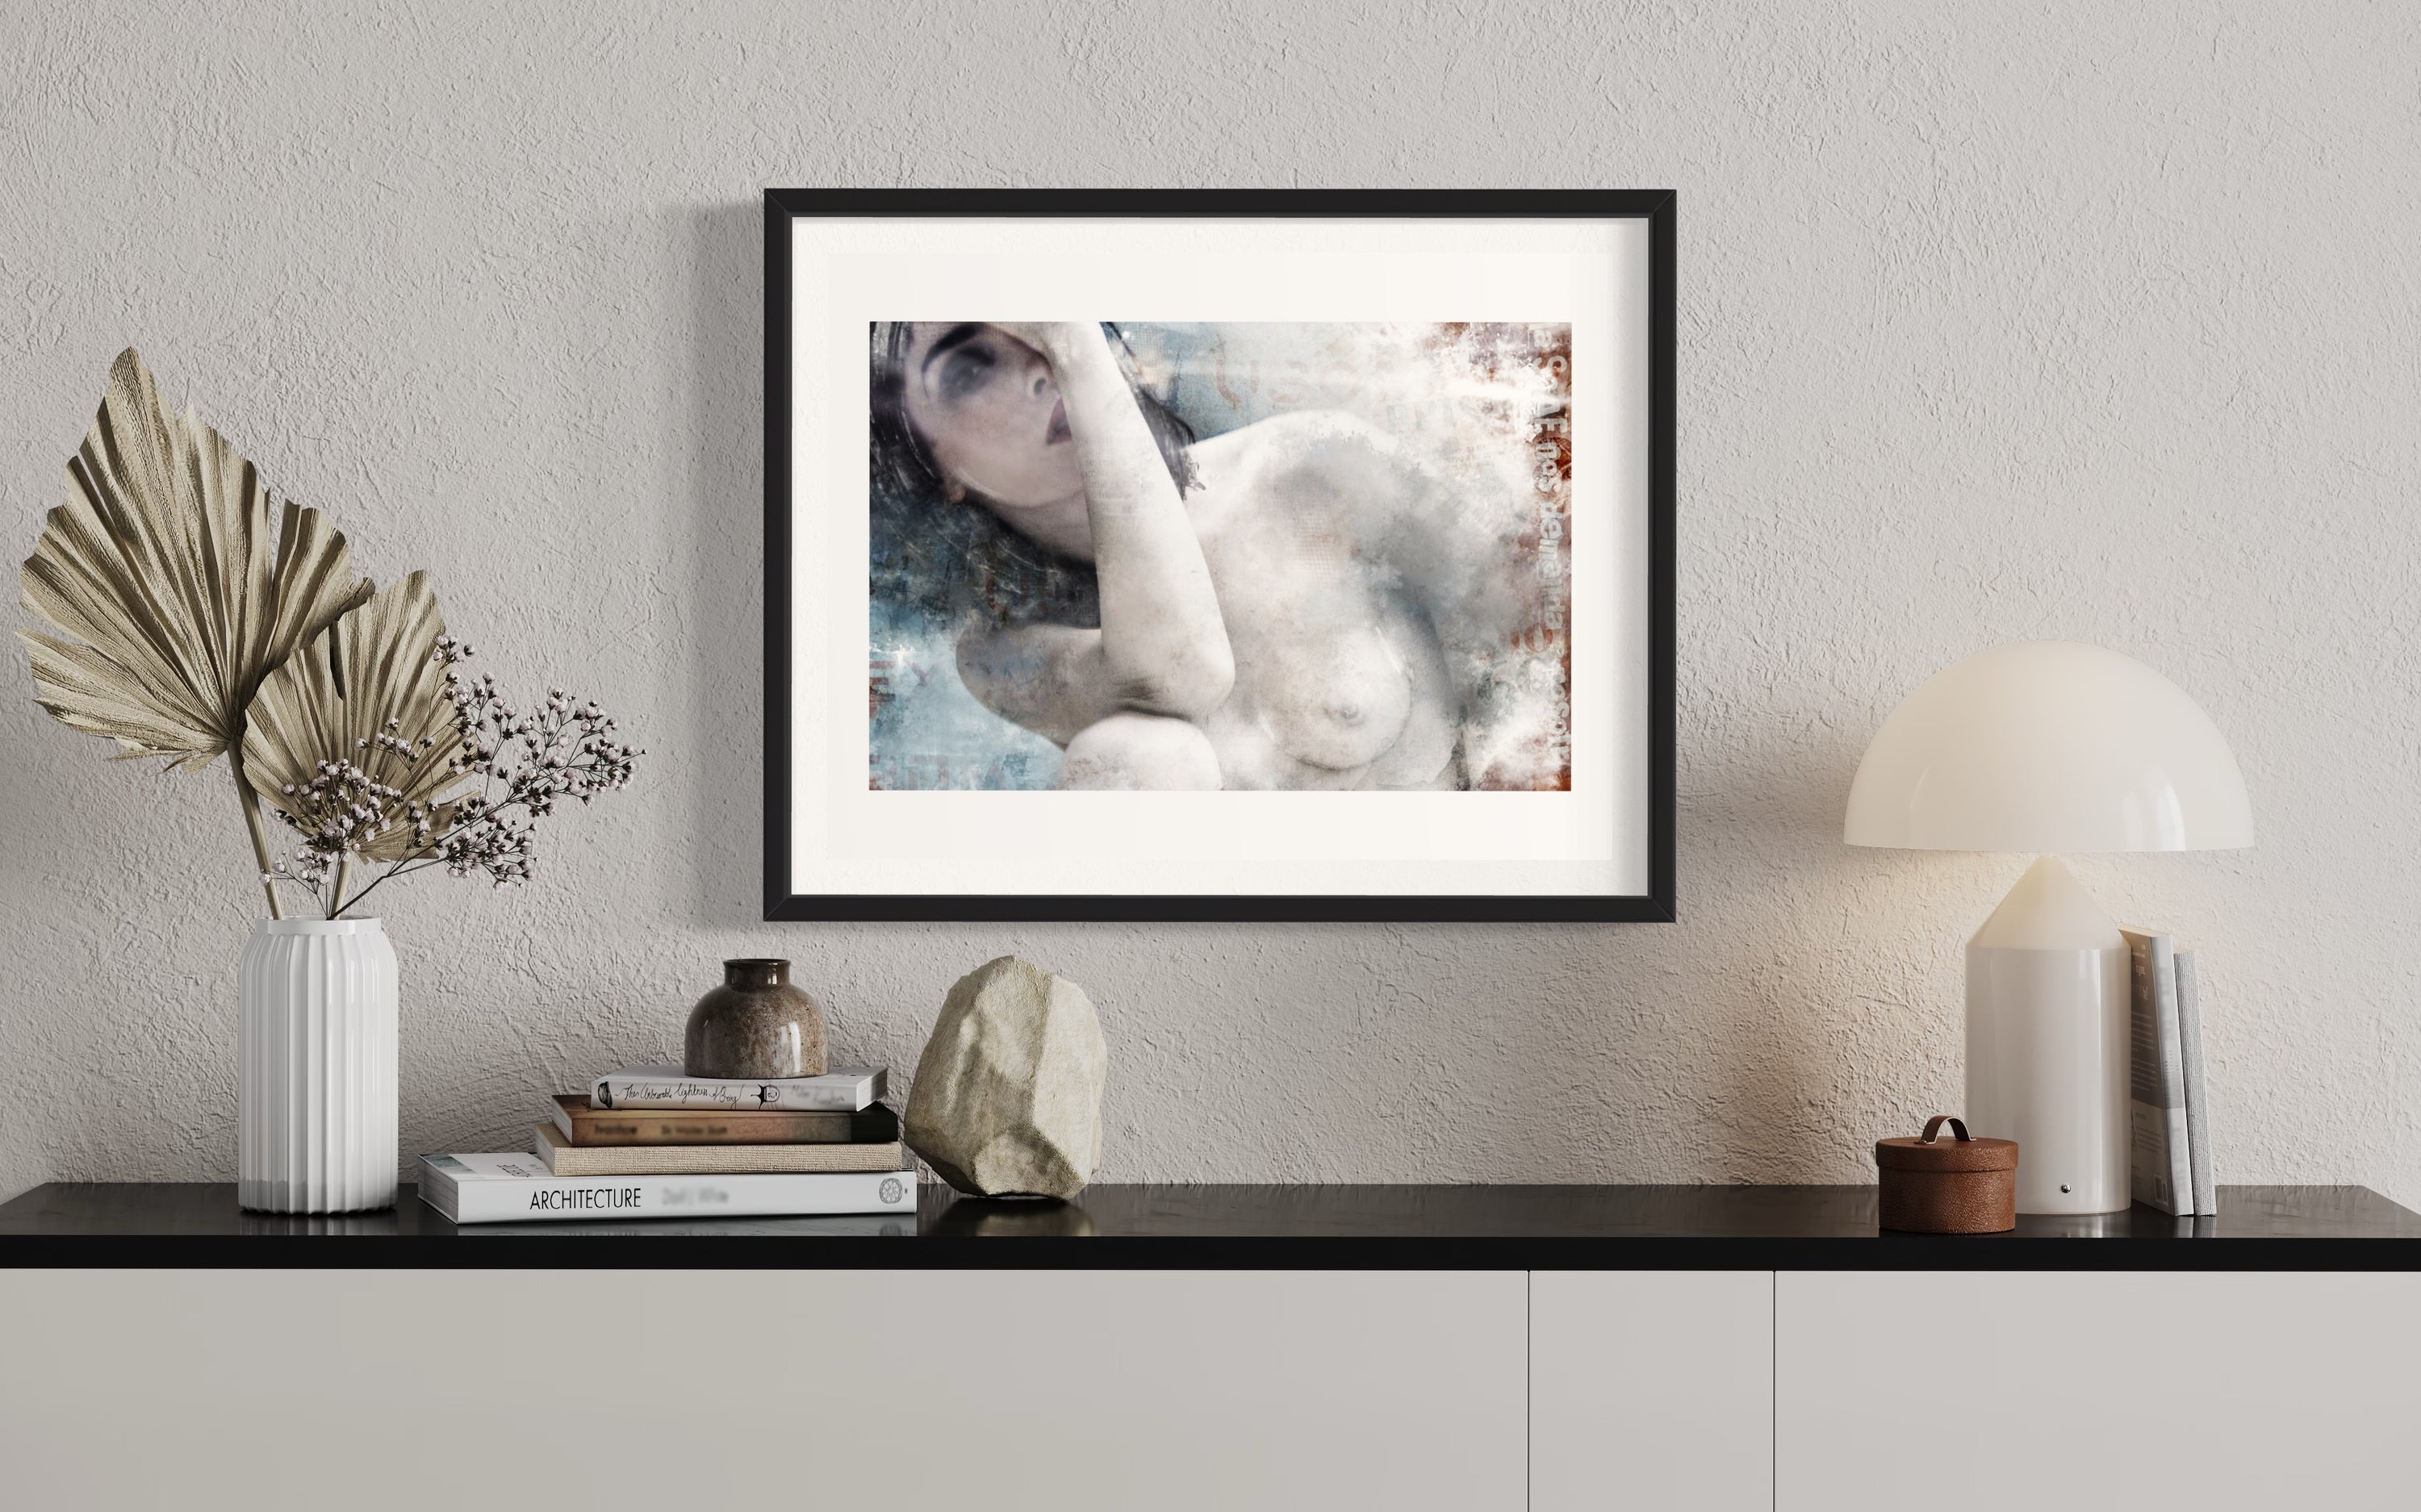 Breathe Me, Limited Edition Print